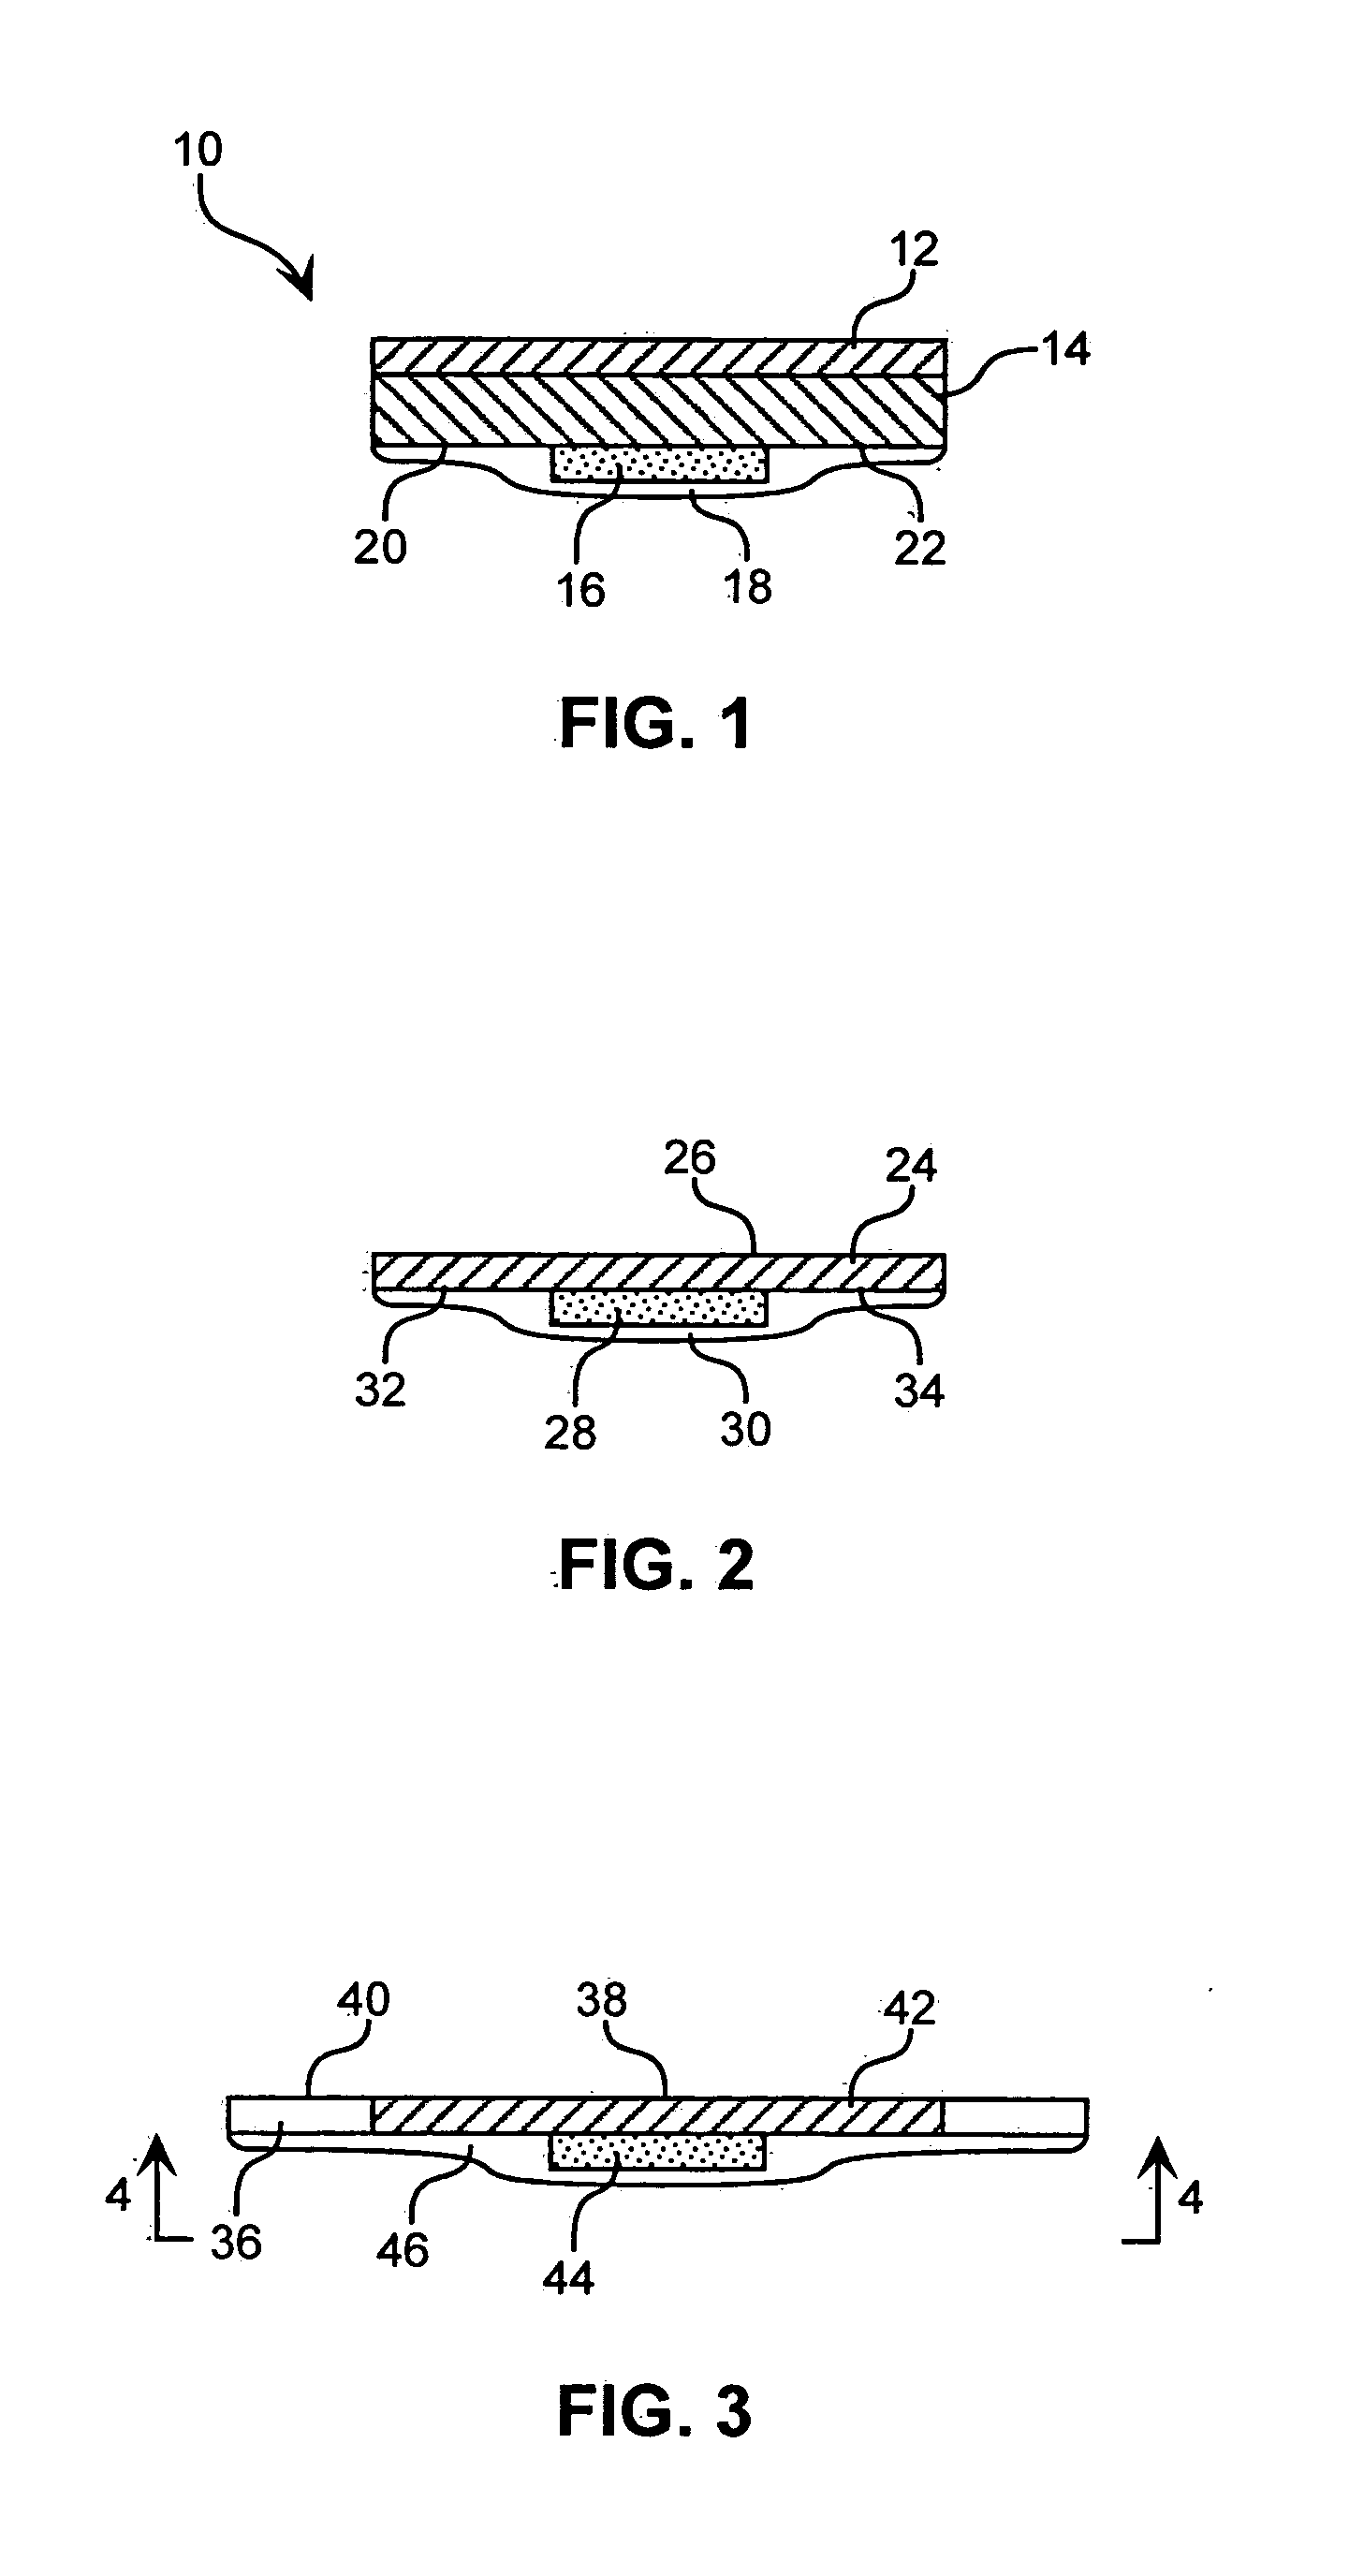 Two-phase, water-absorbent bioadhesive composition for delivery of an active agent to a patient